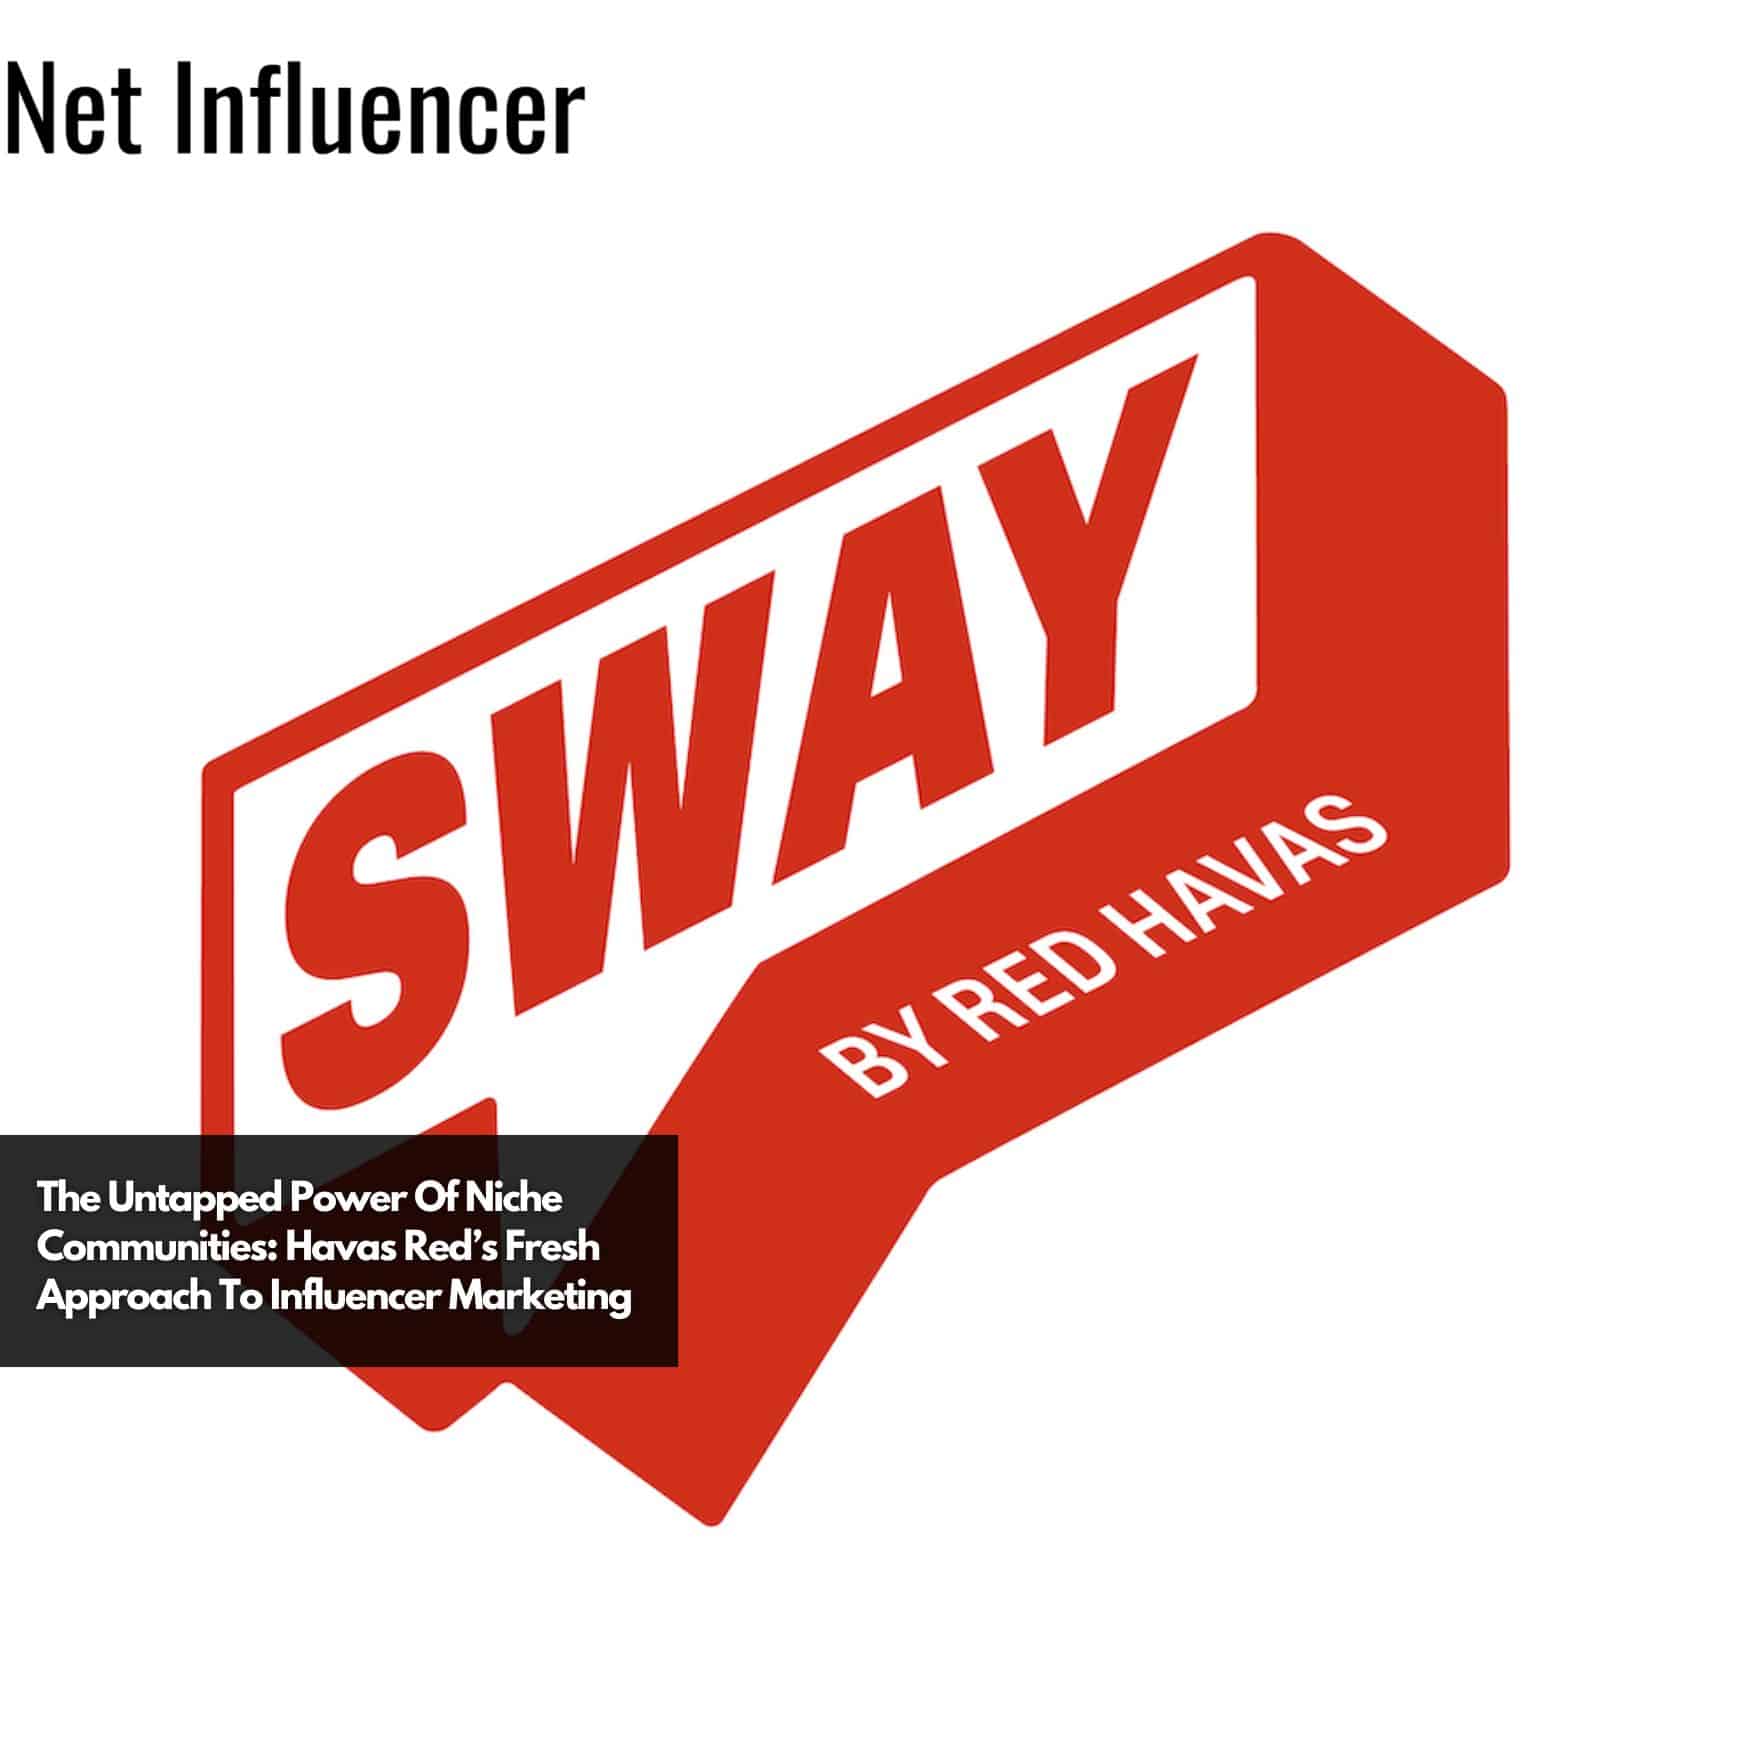 The Untapped Power Of Niche Communities Havas Red’s Fresh Approach To Influencer Marketing